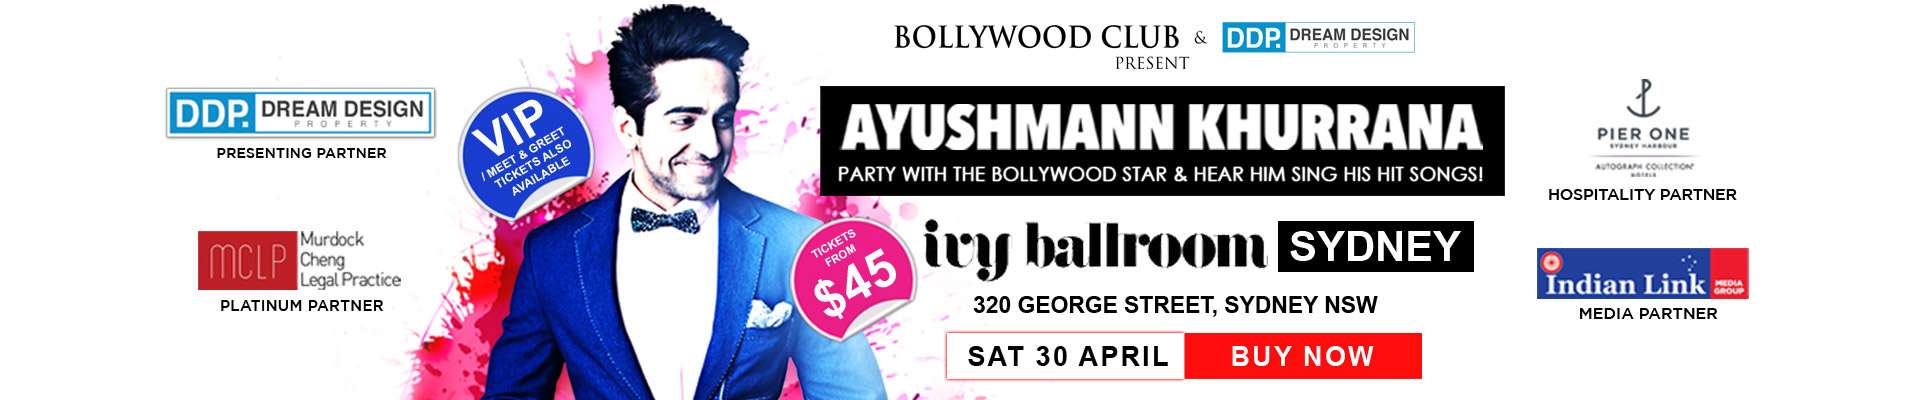 Party with Ayushmann Khurrana In Sydney